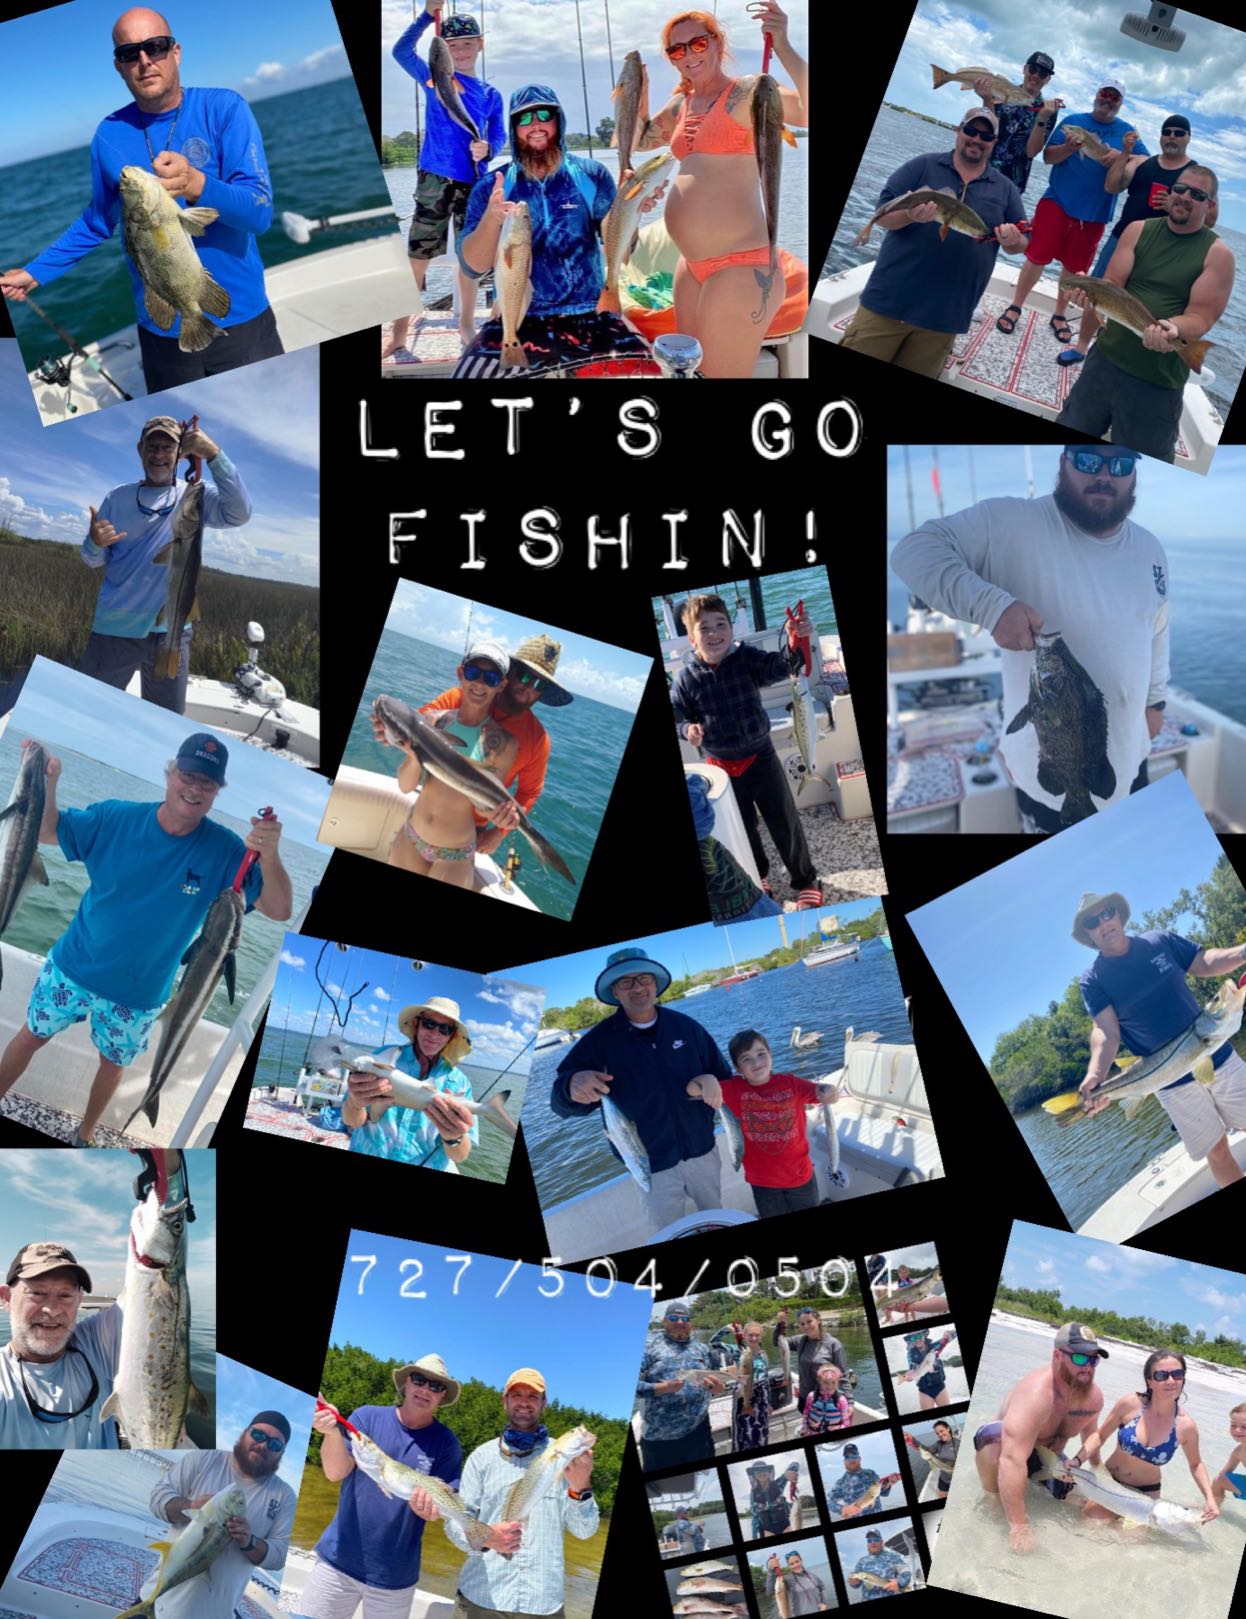 Tarpon Springs Fishing charters, let's go! 